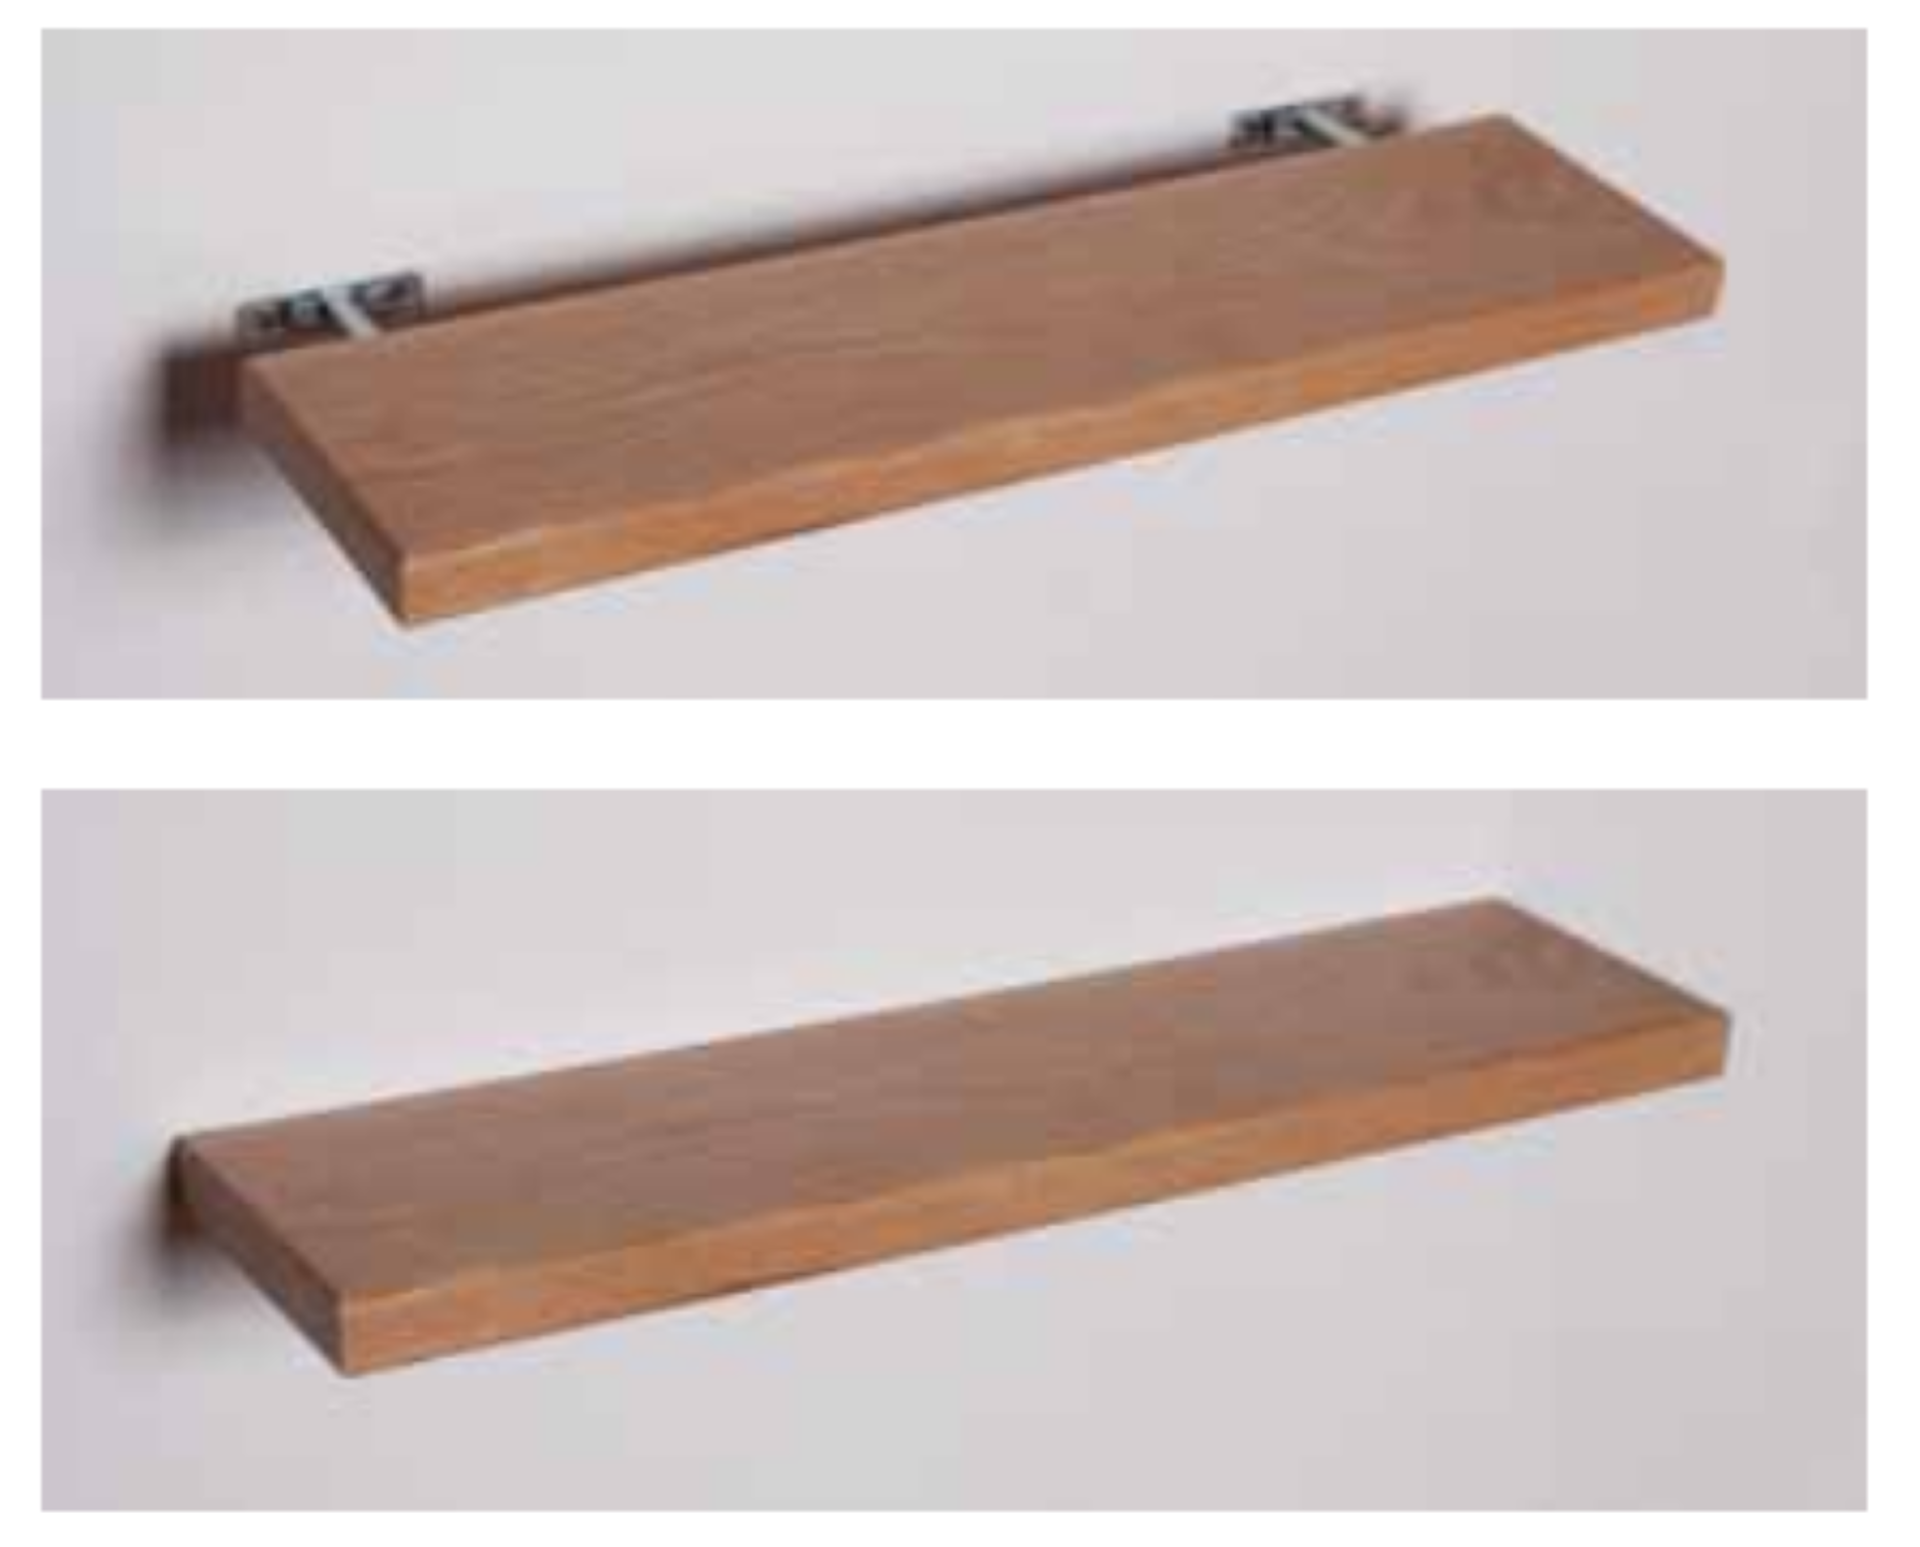 1 x Stonearth Bathroom Storage Shelf With Concealed Brackets - American Solid Walnut - Size: 300mm - Image 4 of 19